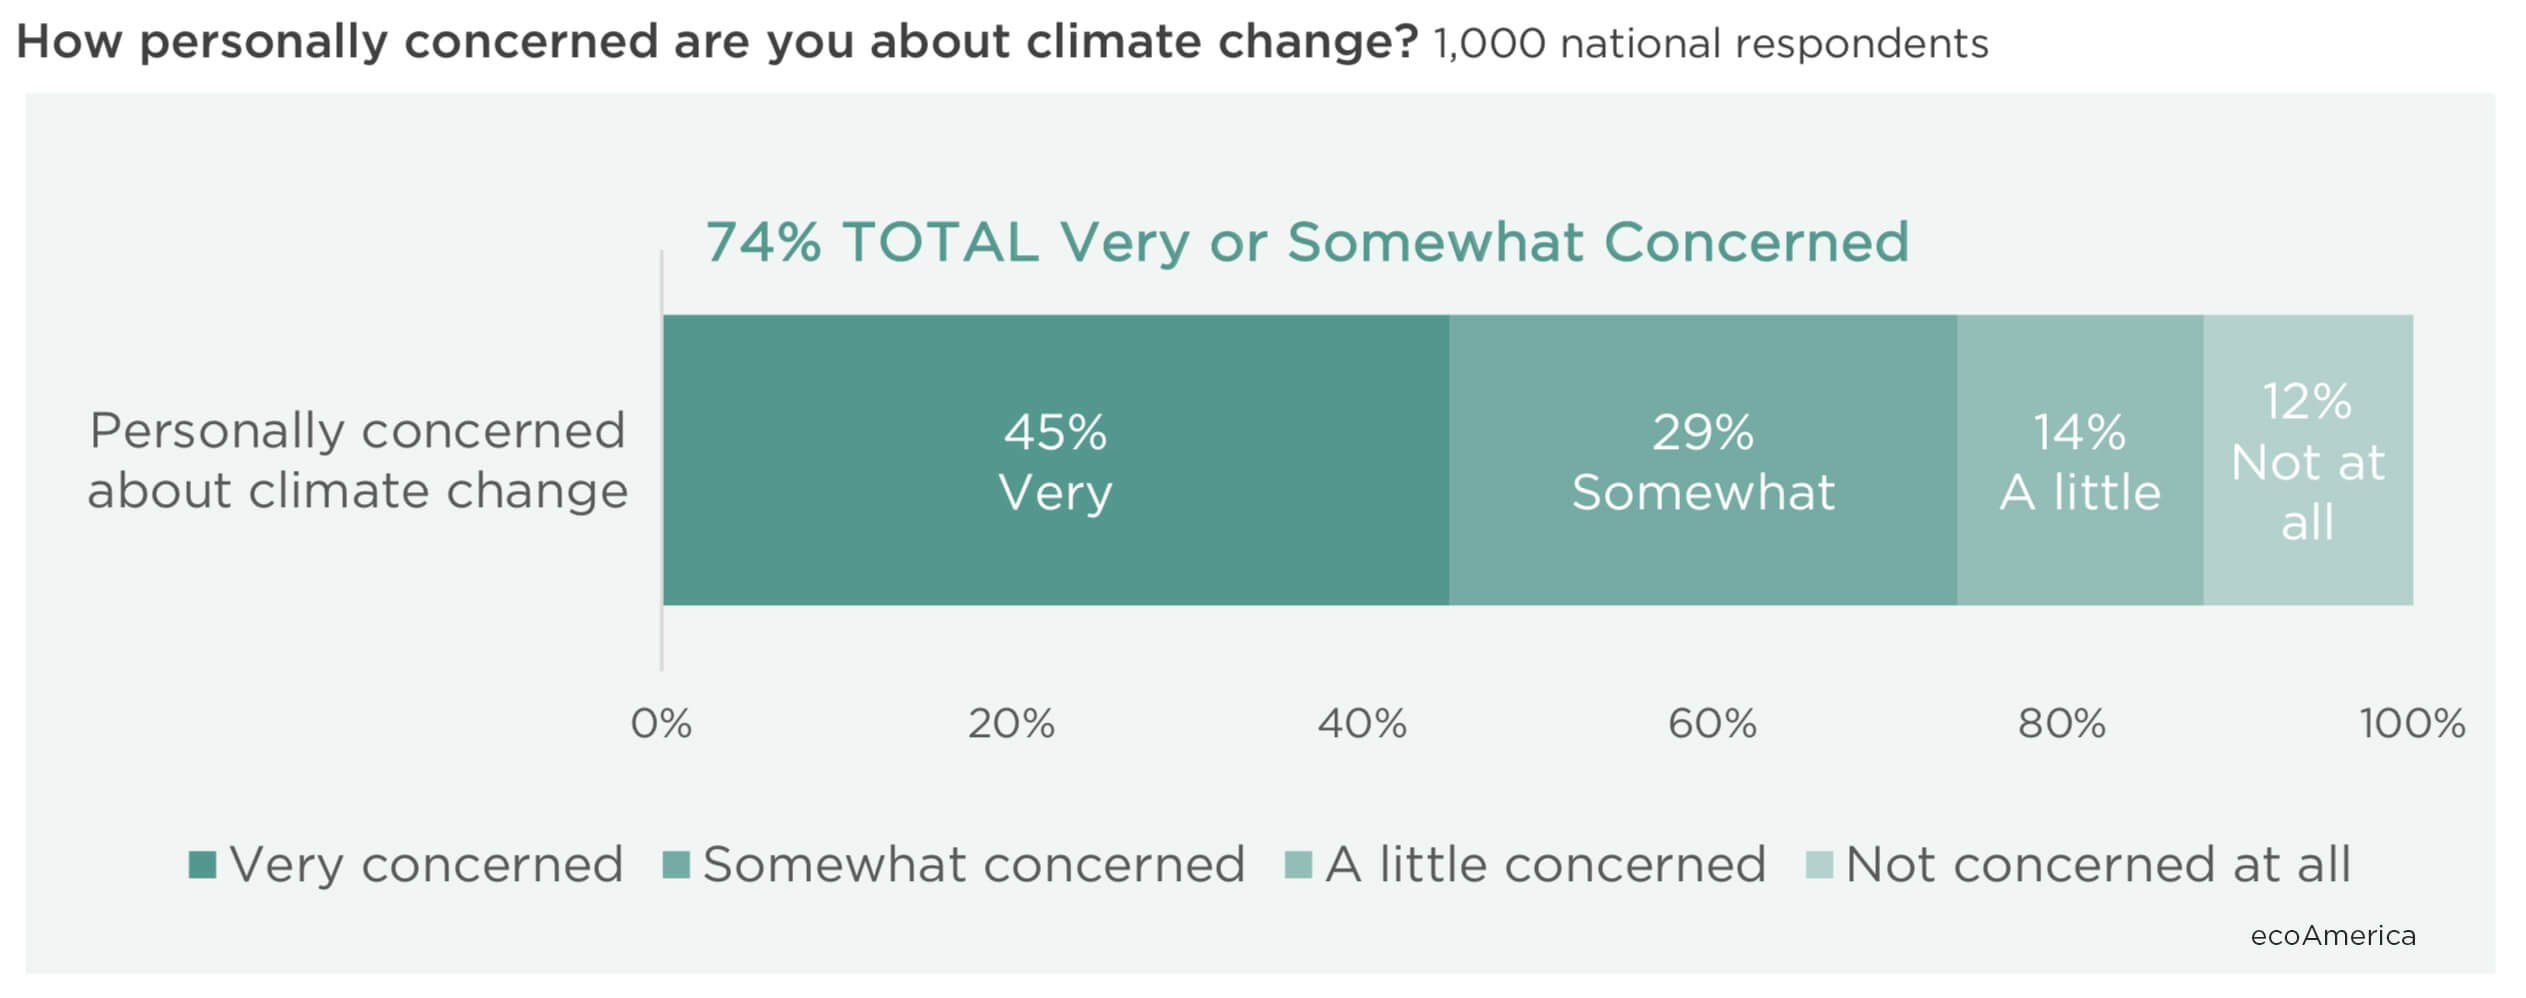 74% of Americans are very or somewhat concerned